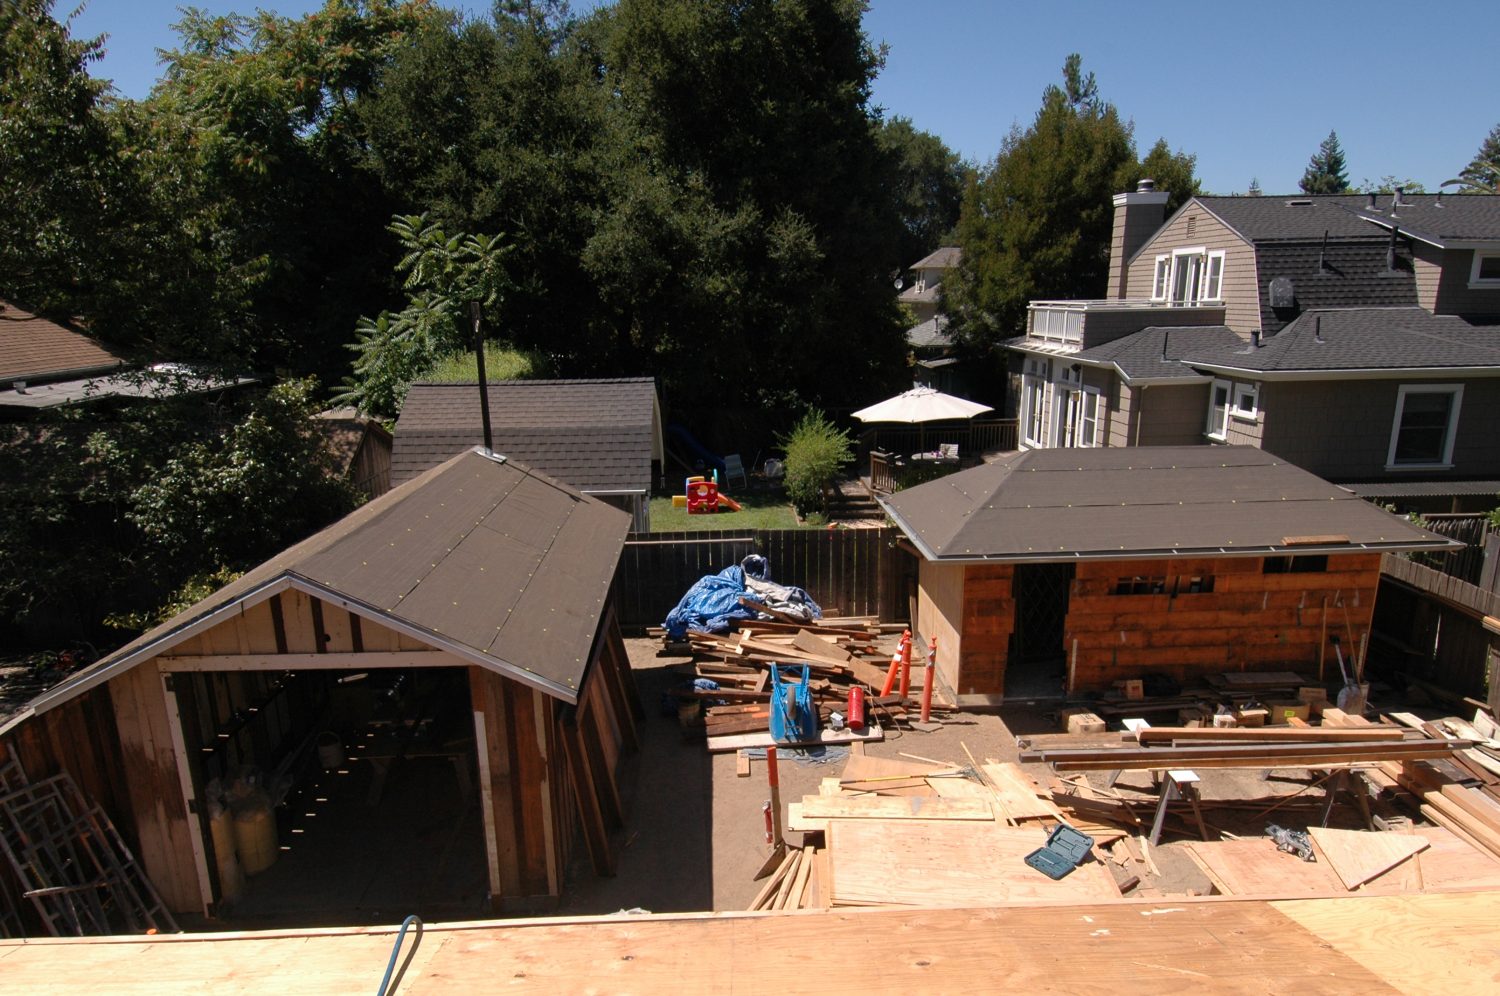 A photo of the restoration efforts at Addison Avenue focusing on the new roofs of the shed and garage.